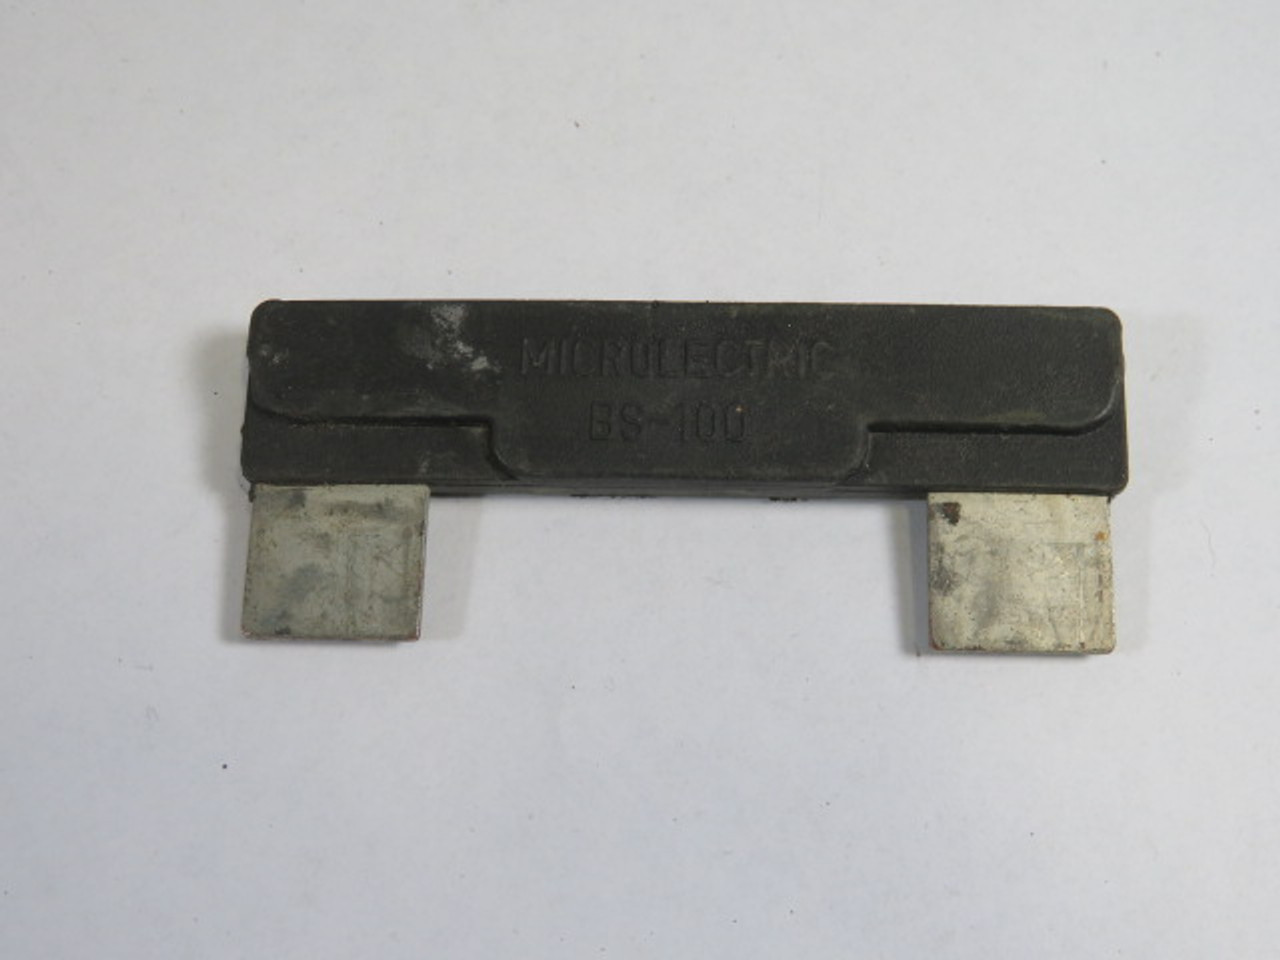 Microlectric BS-100 Jumper Bar 200A USED